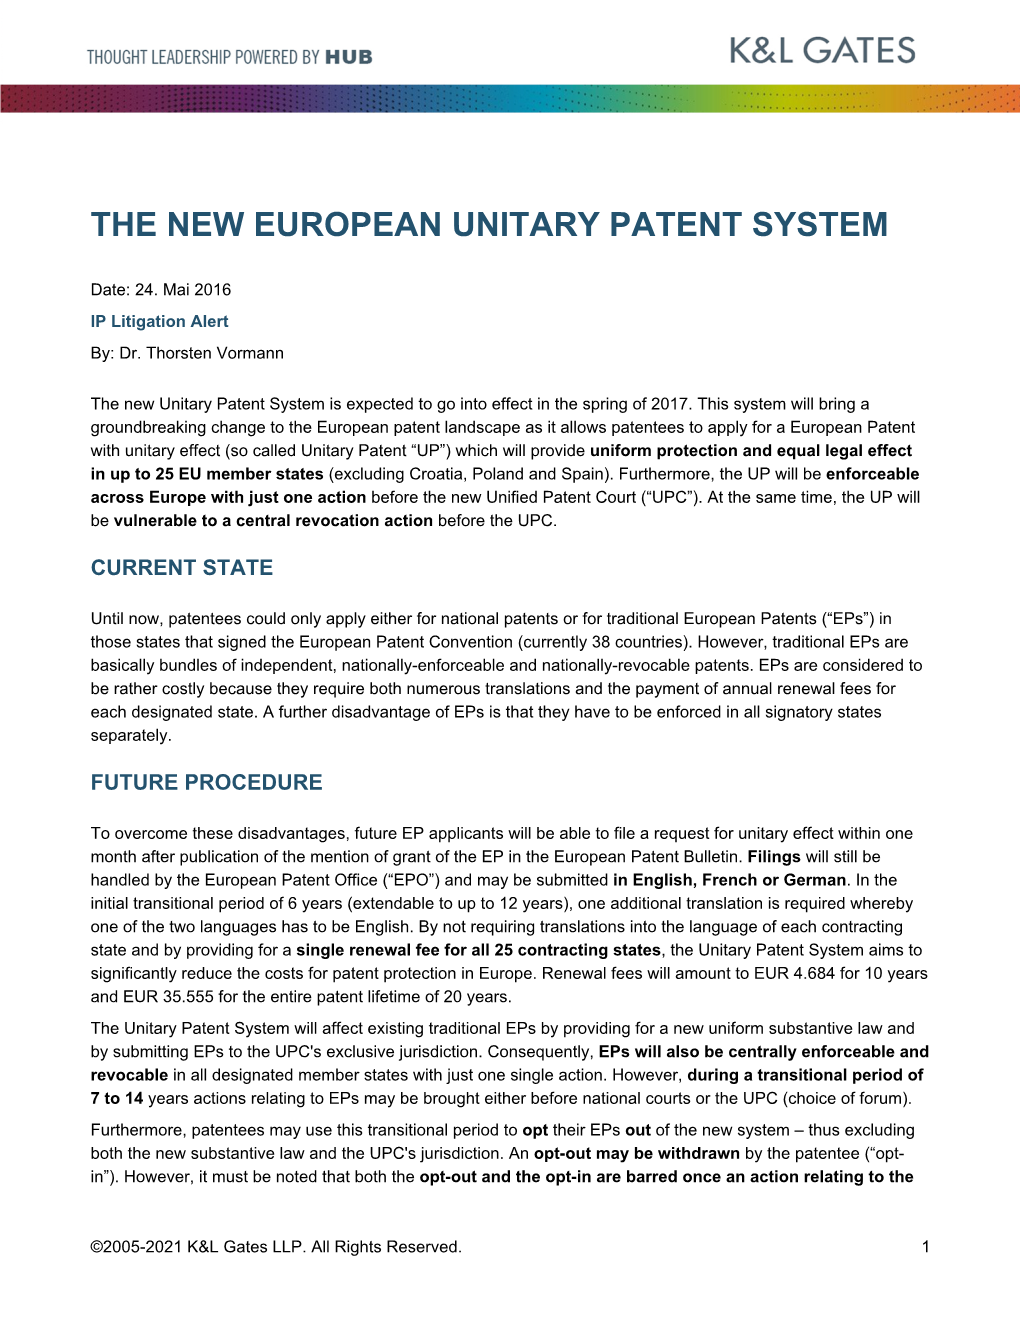 The New European Unitary Patent System